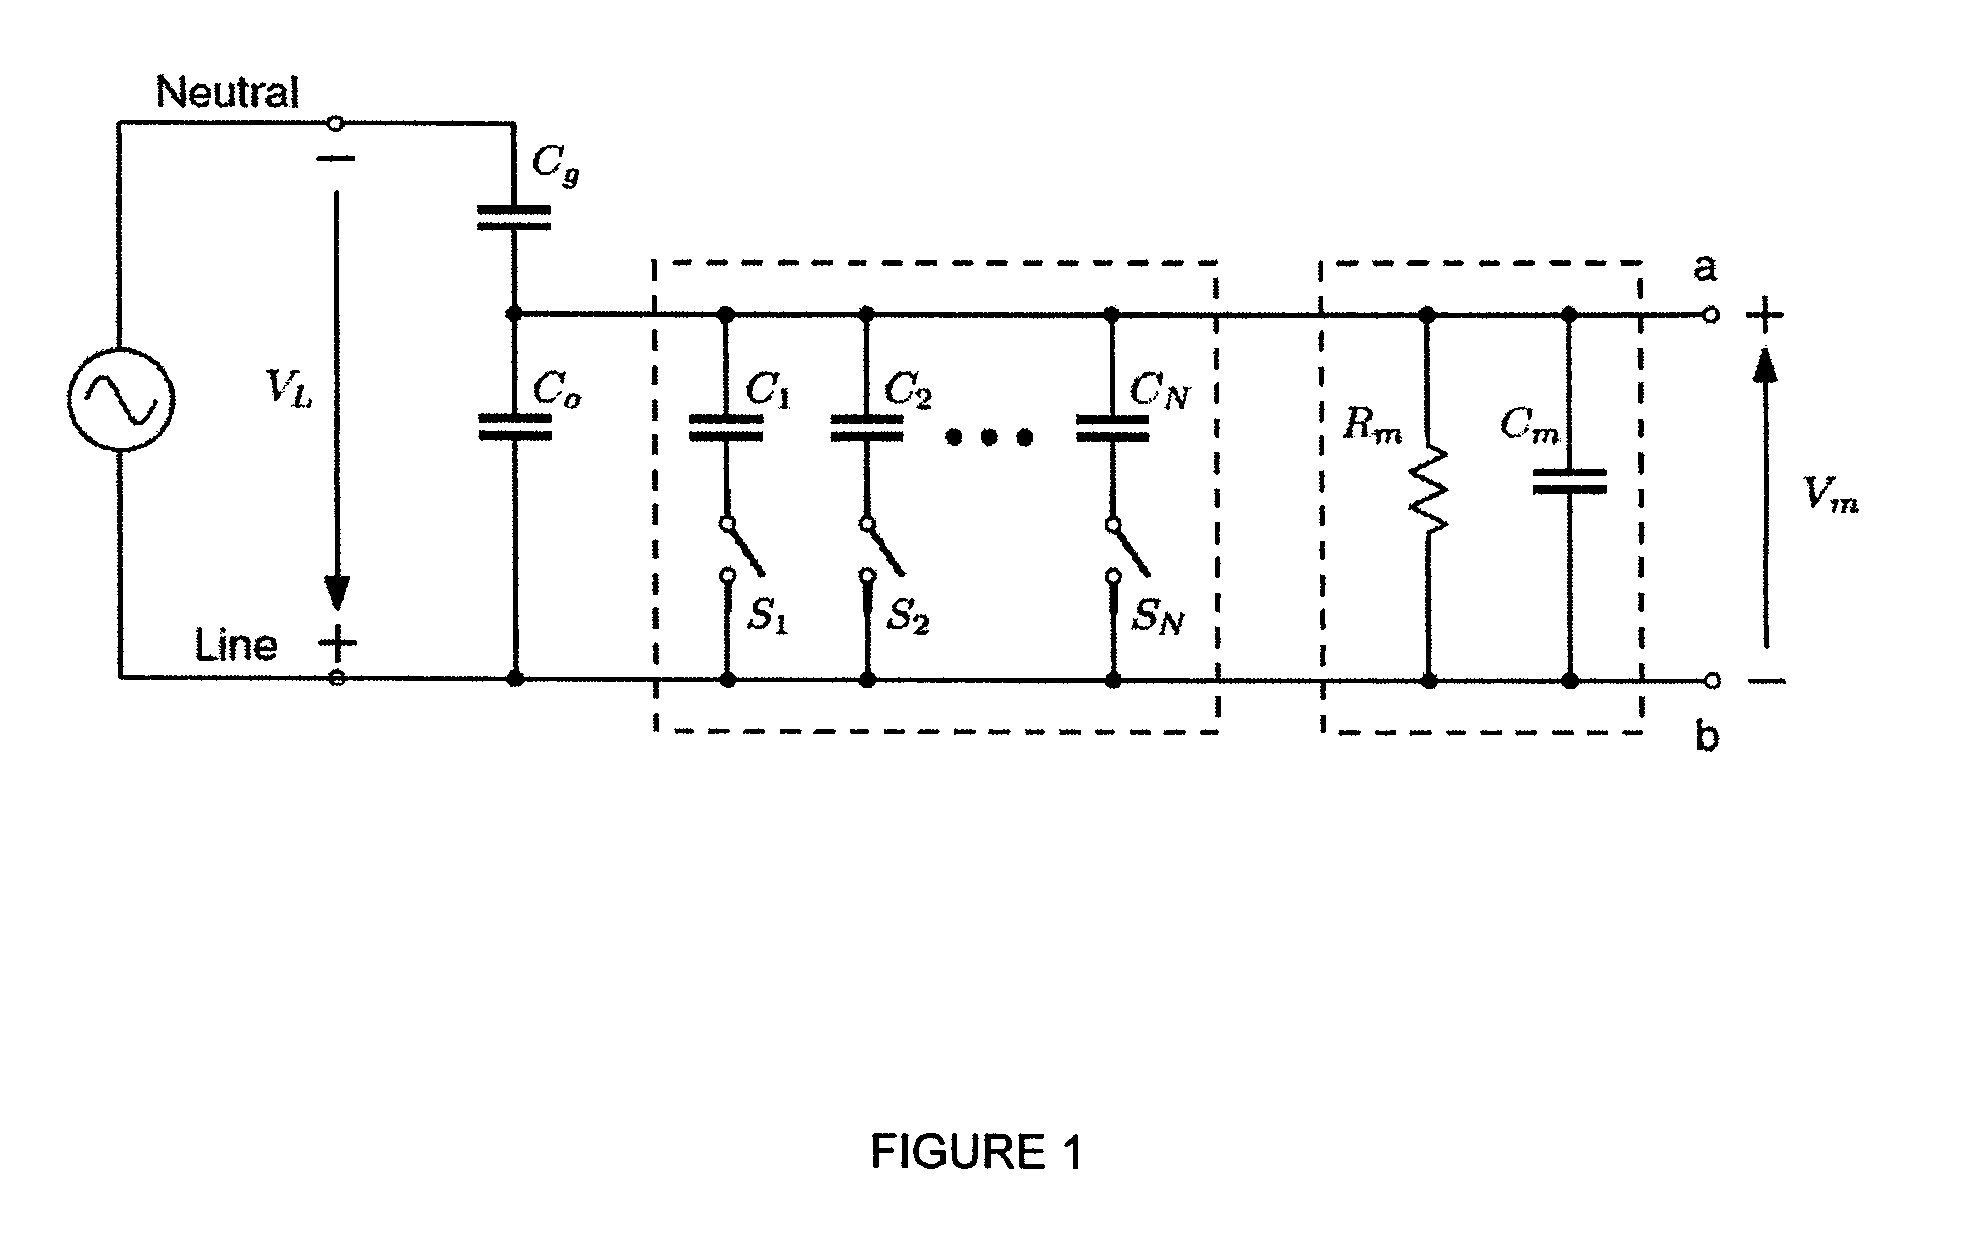 Voltage sensing unit for sensing voltage of high-power lines using a single-contact point and method of use thereof